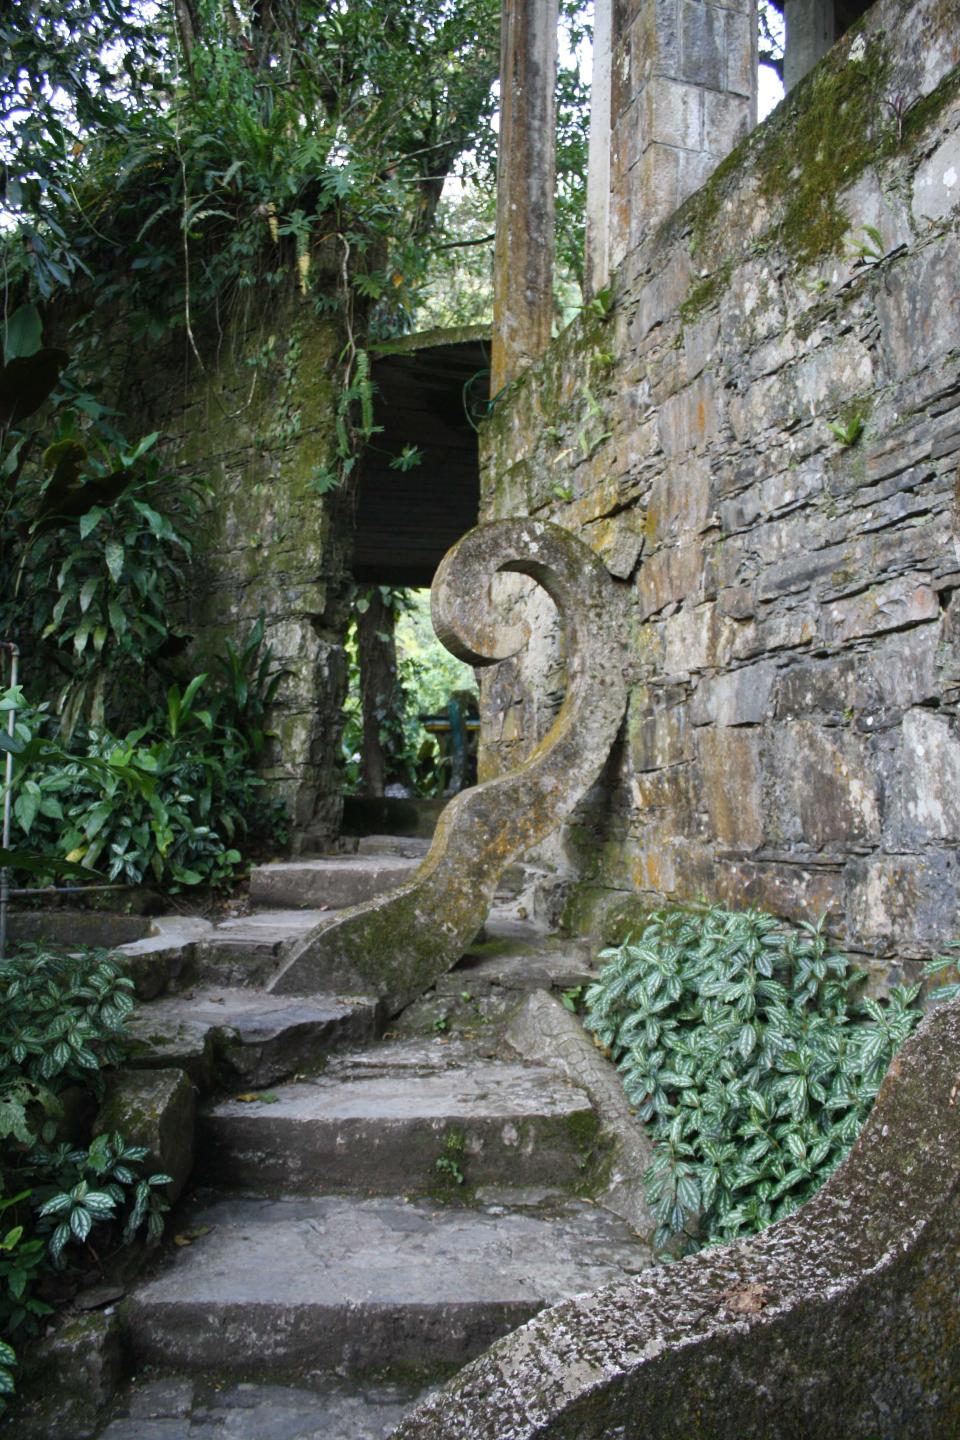 This Jan. 31, 2014 photo shows an ornate stairway in Las Pozas, a dreamy, little-known garden of surreal art, in Mexico’s northeast jungle. The garden was created by the late Edward James, a British multimillionaire and arts patron who favored surrealists like Rene Magritte and Salvador Dali. (AP Photo/Teresa de Miguel Escribano)